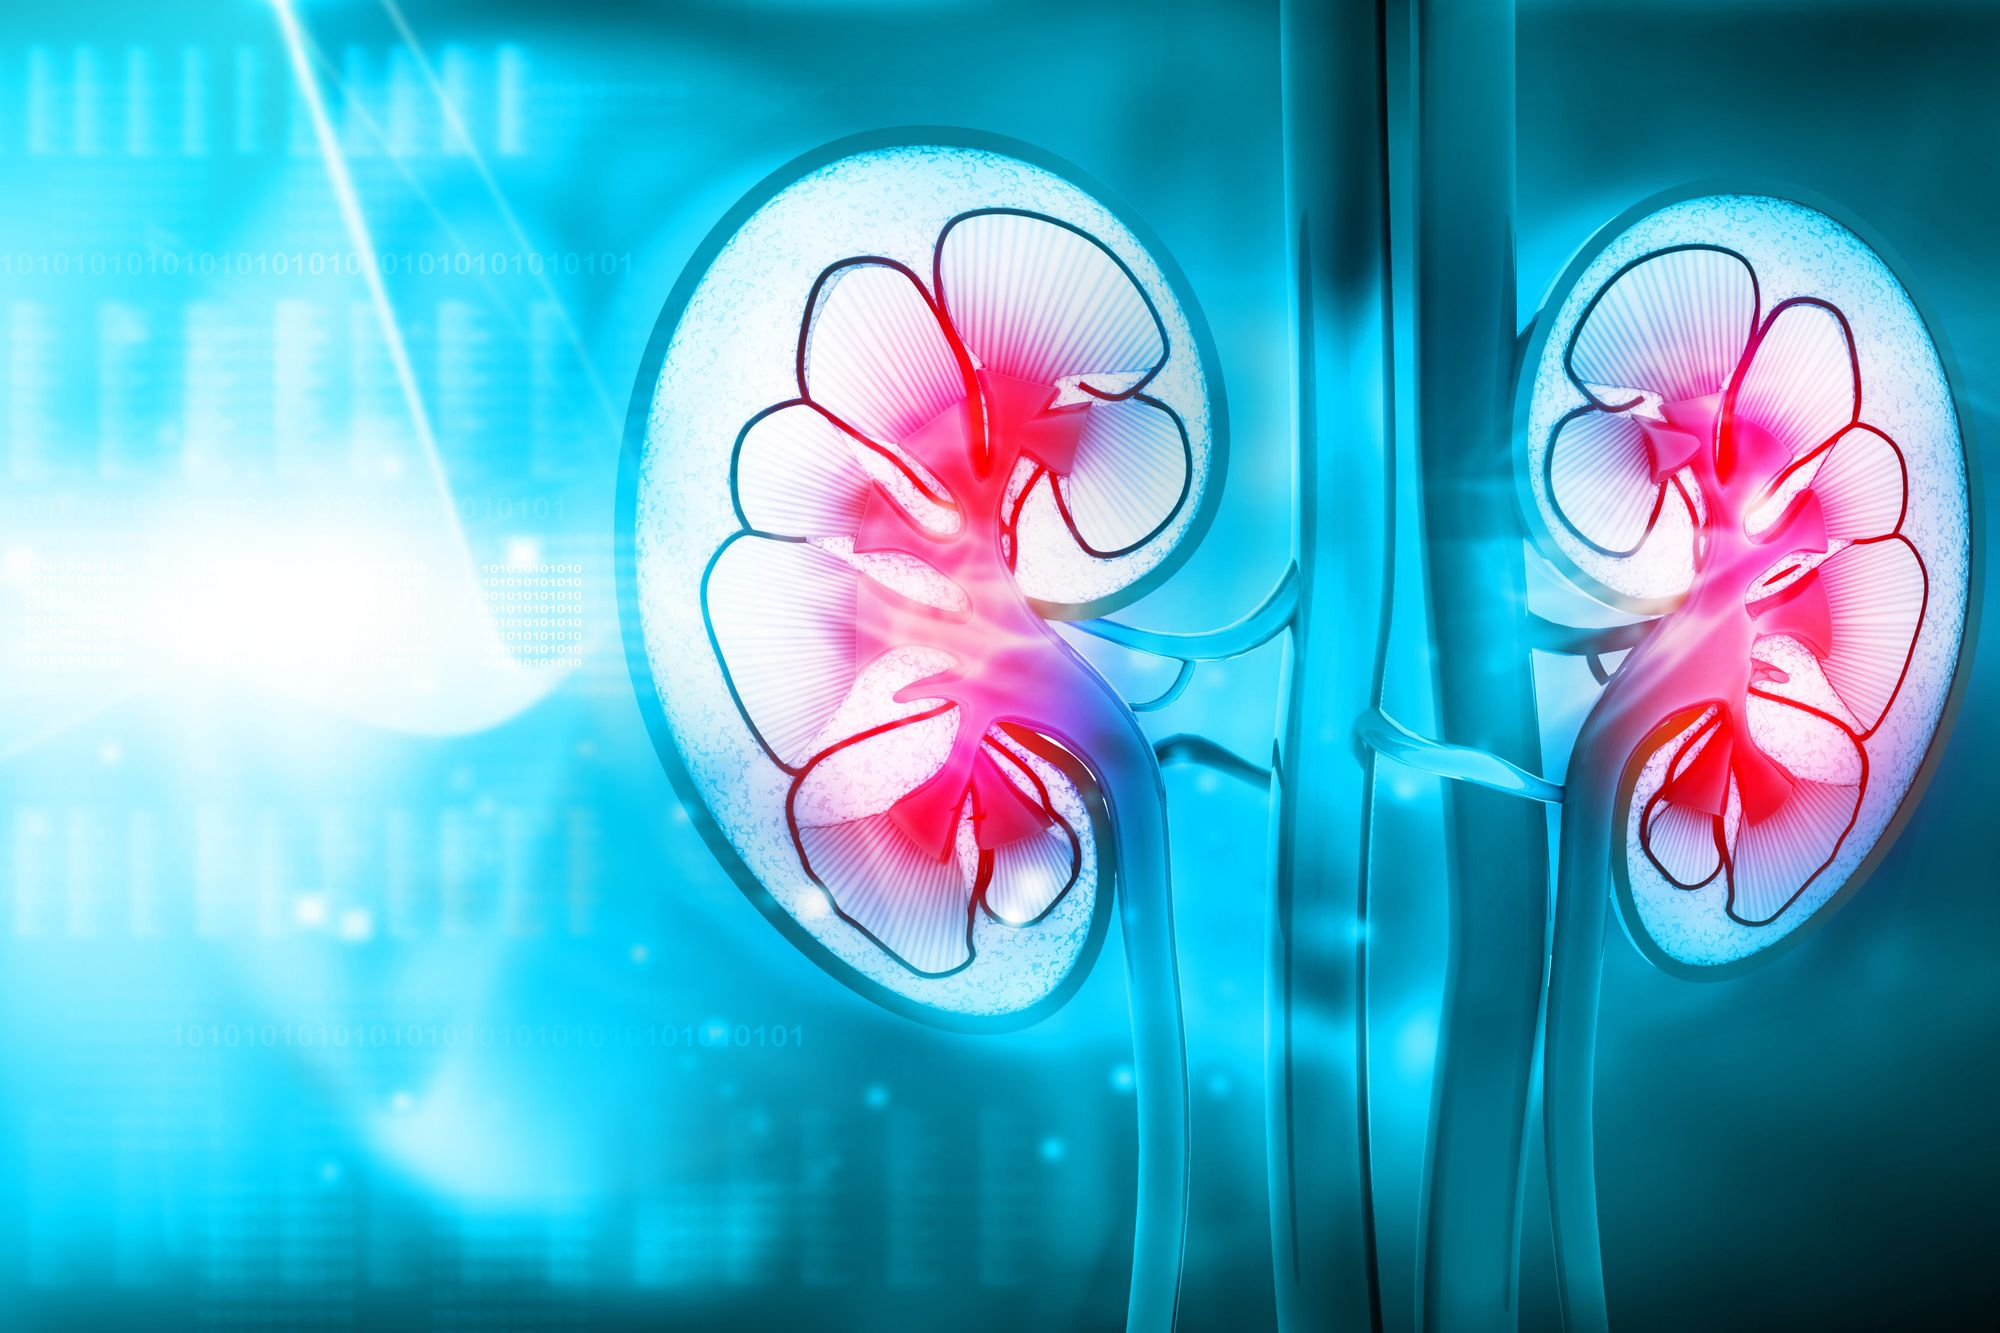 Finerenone Reduces Risk of Negative Kidney Outcomes, Regardless of CKD Severity